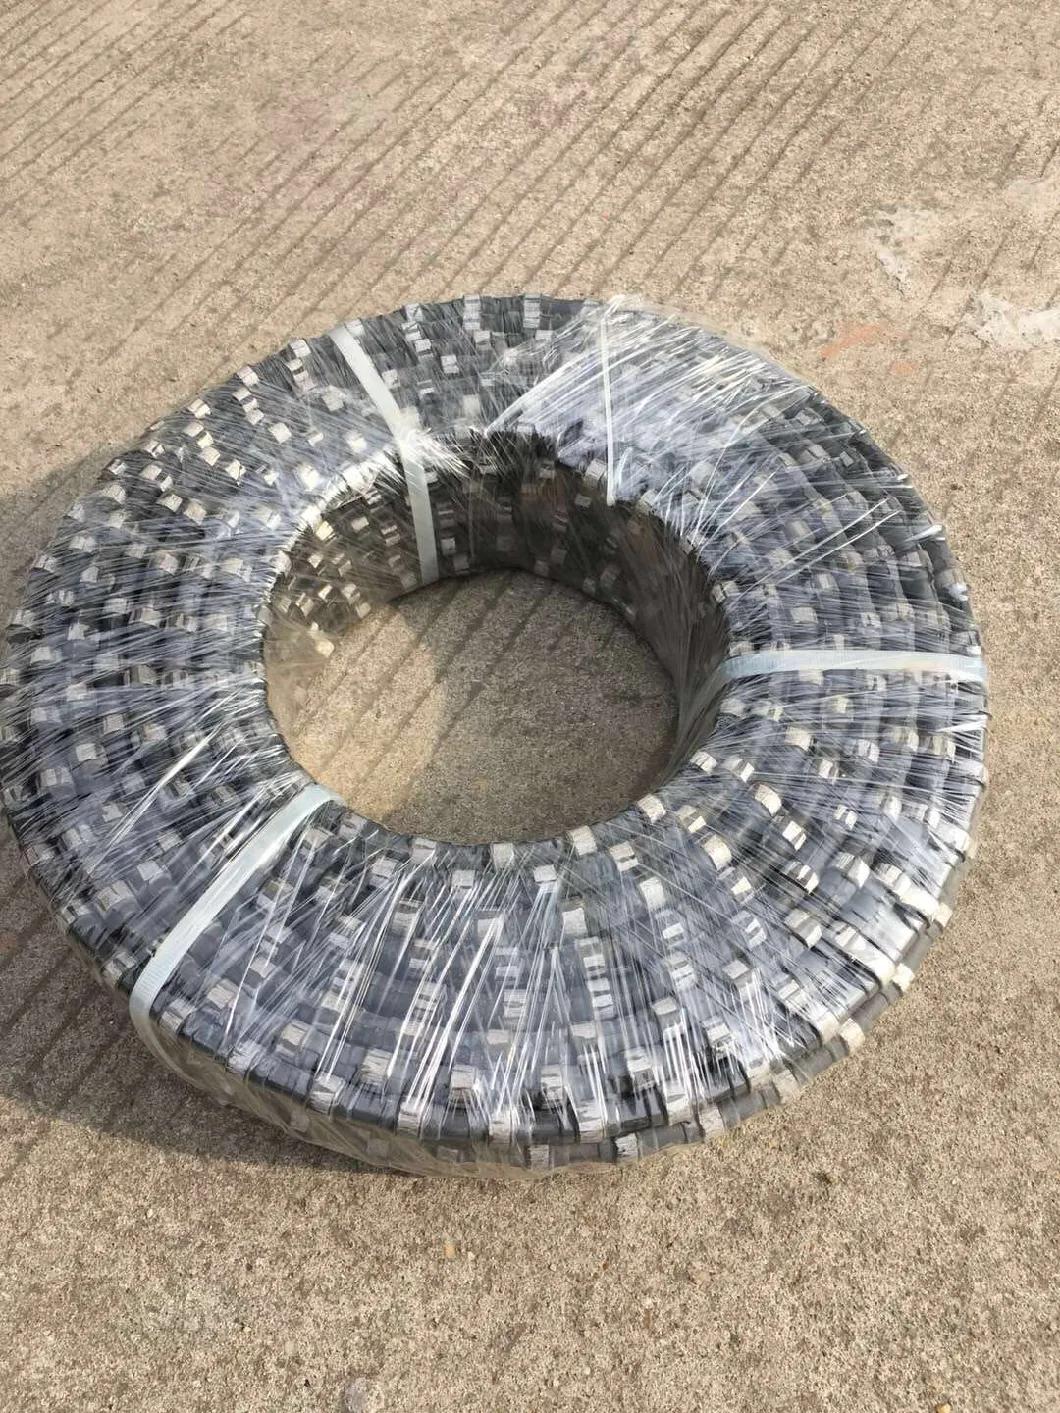 Professional Diamond Wire Saw for Cutting Hard Granite Marble Stone